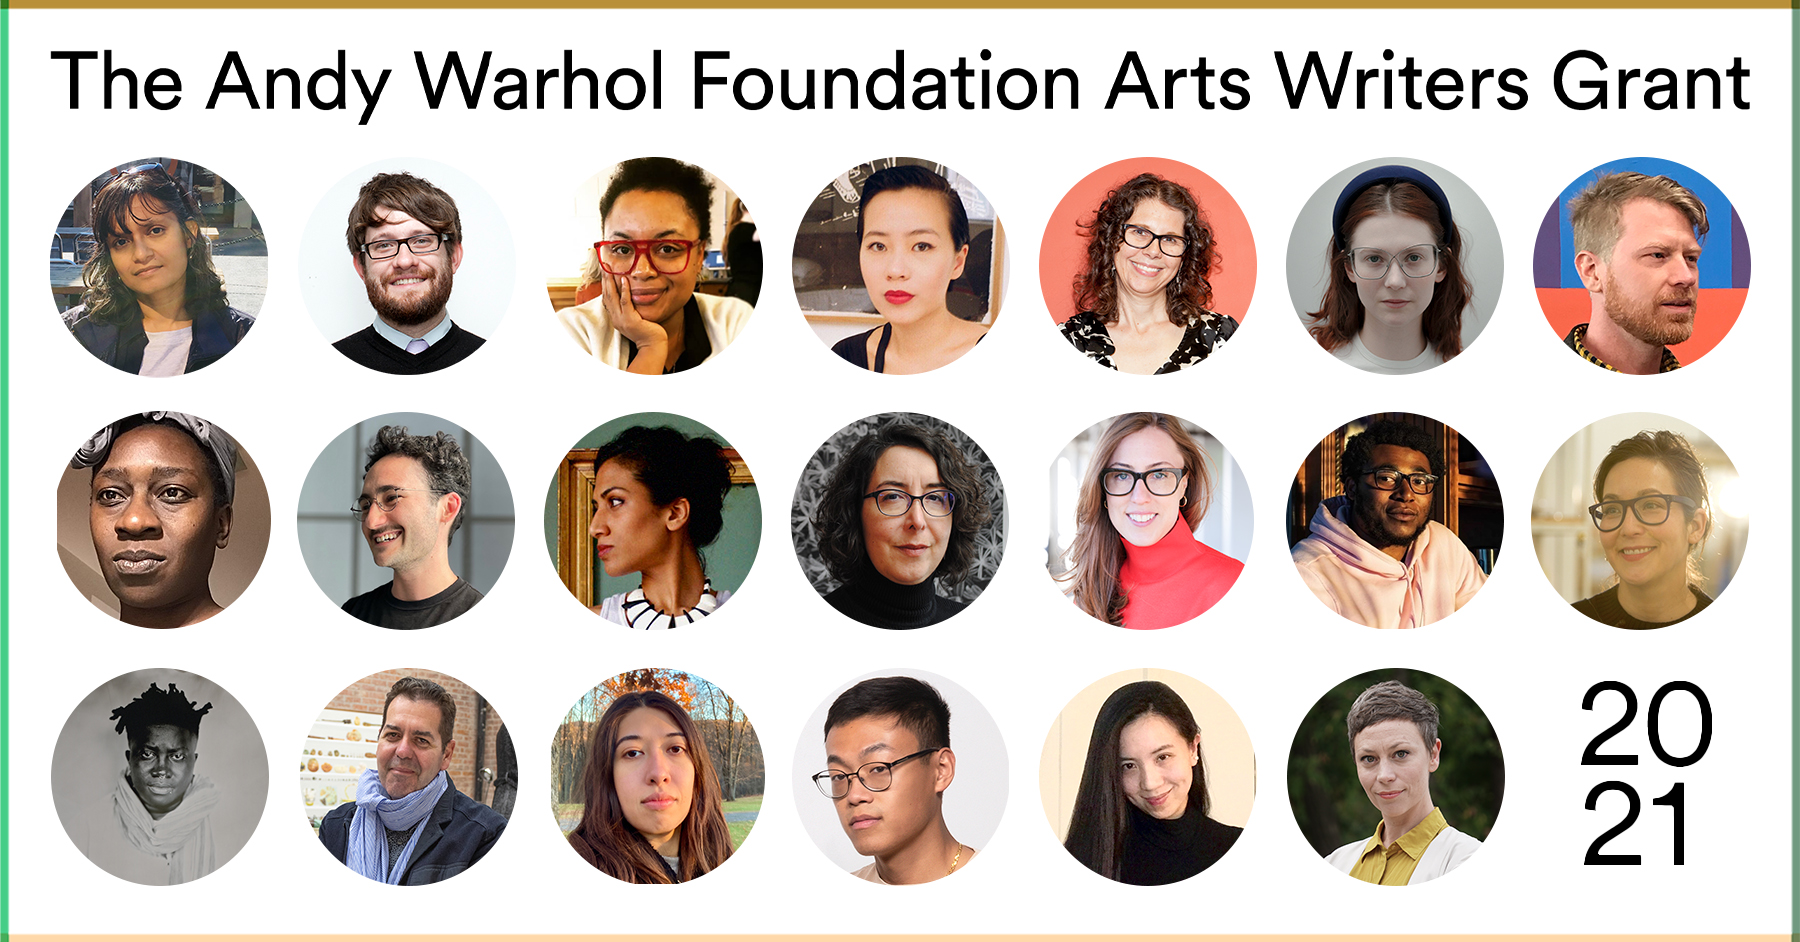 The 2021 The Andy Warhol Foundation Arts Writers Grantees